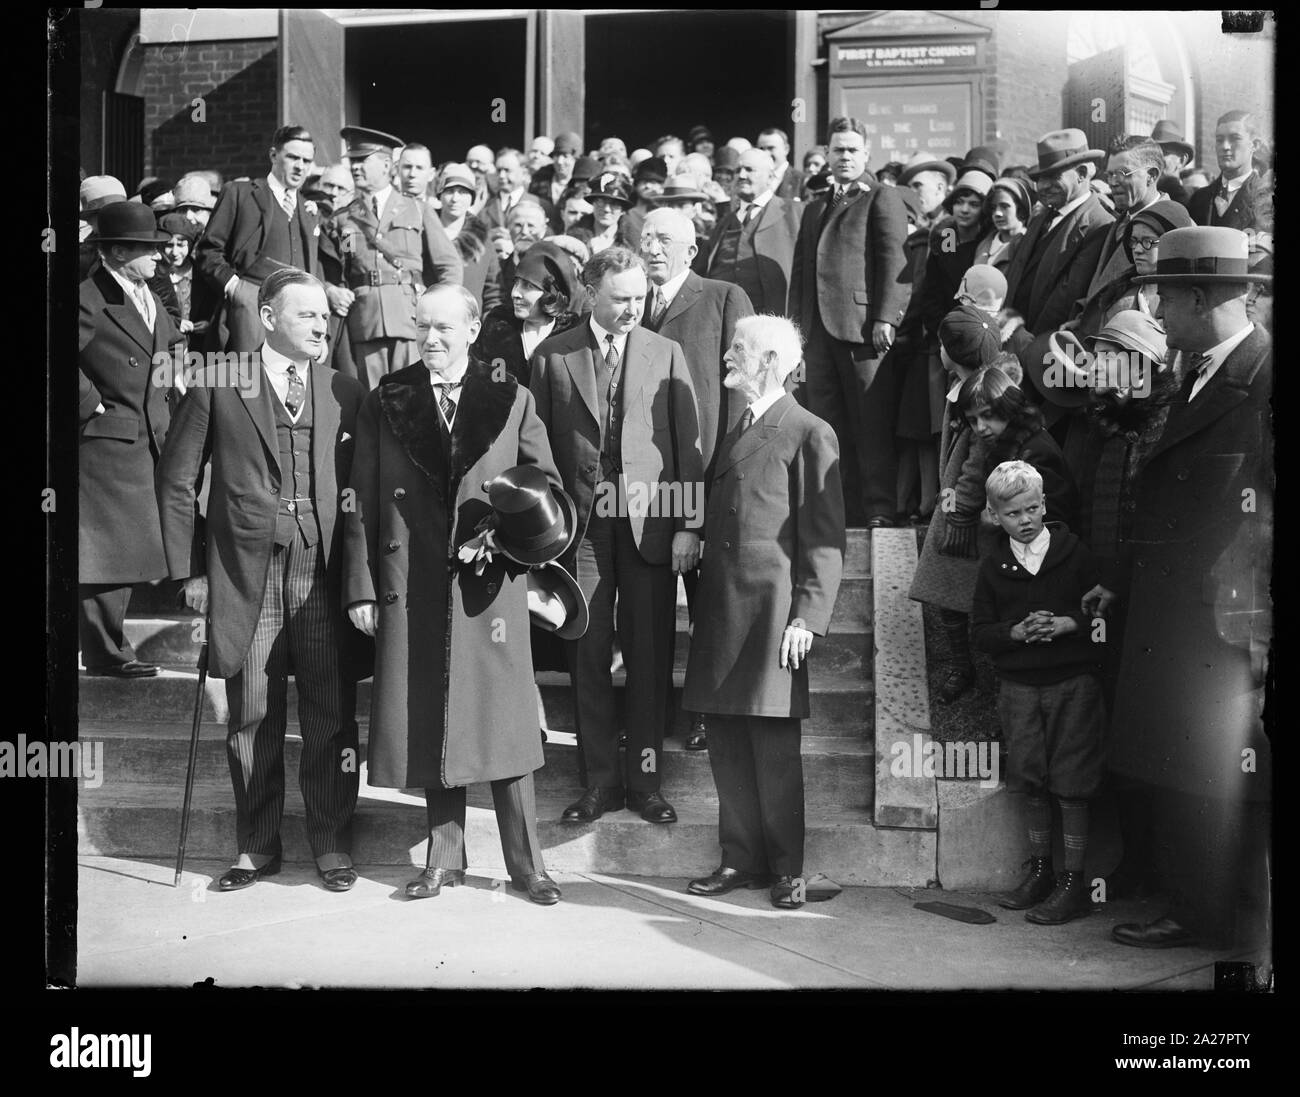 President and Mrs. Coolidge attend Thanksgiving Day service In Virginia. In Virginia for an old-fashioned Thanksgiving, President and Mrs. Coolidge attended Thanksgiving Day services at the First Baptist Church in Charlottesville, Virginia. In the photograph, left to right: Governor Angus McLean of North Carolina; President Coolidge; Mrs. Coolidge; Governor Harry Byrd of Virginia; Rev. George L. Petrie of the Charlottesville Ministerial Associate; and Rev. J.W. Moore, Pastor of the First Baptist Church Stock Photo